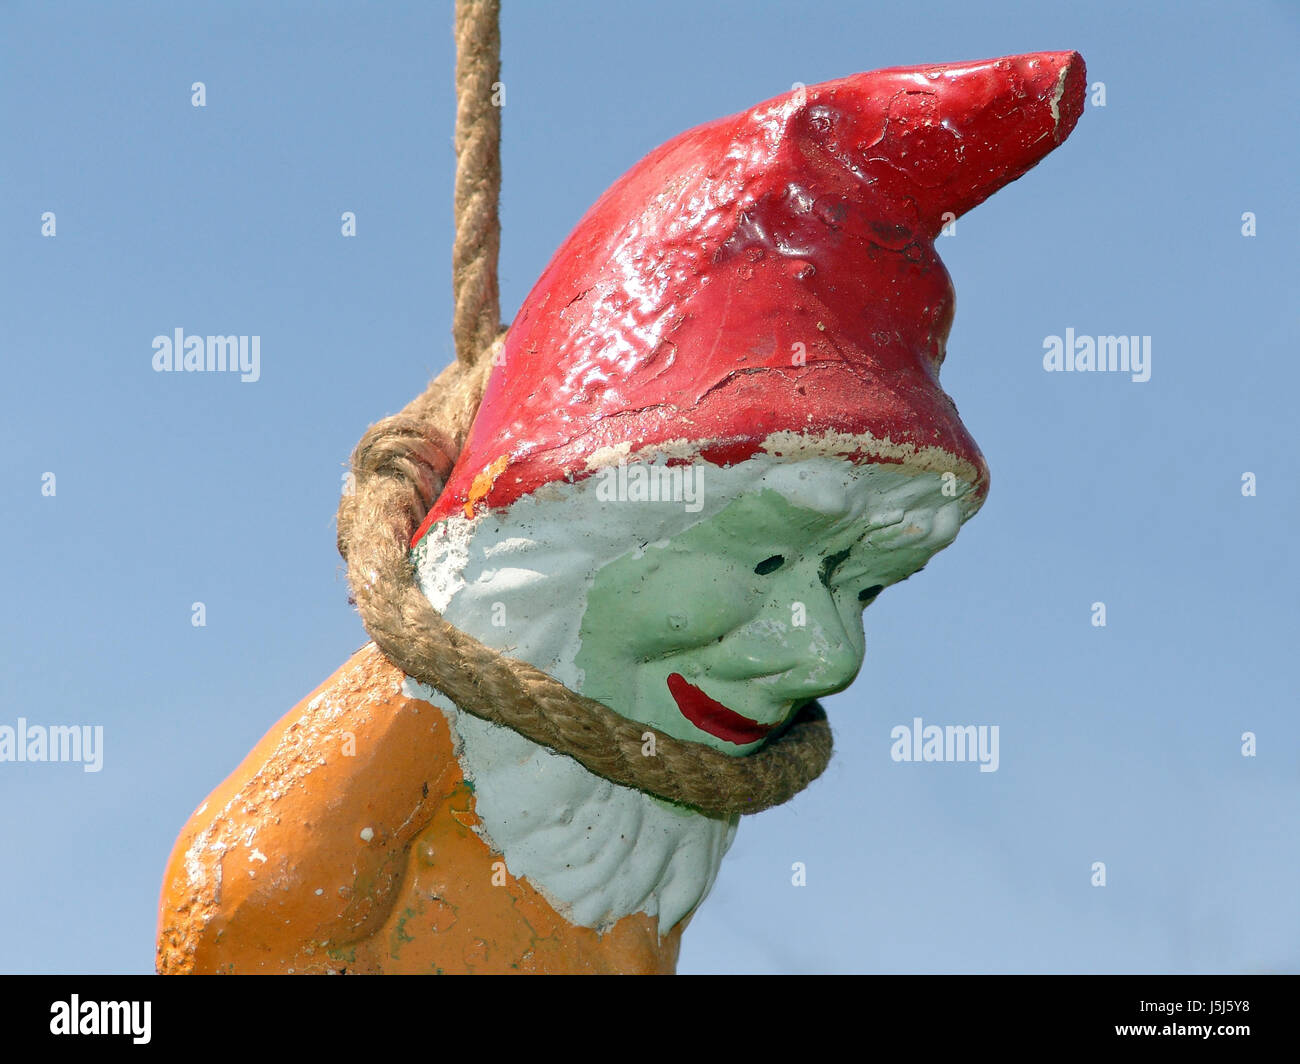 Gehenkt High Resolution Stock Photography and Images - Alamy